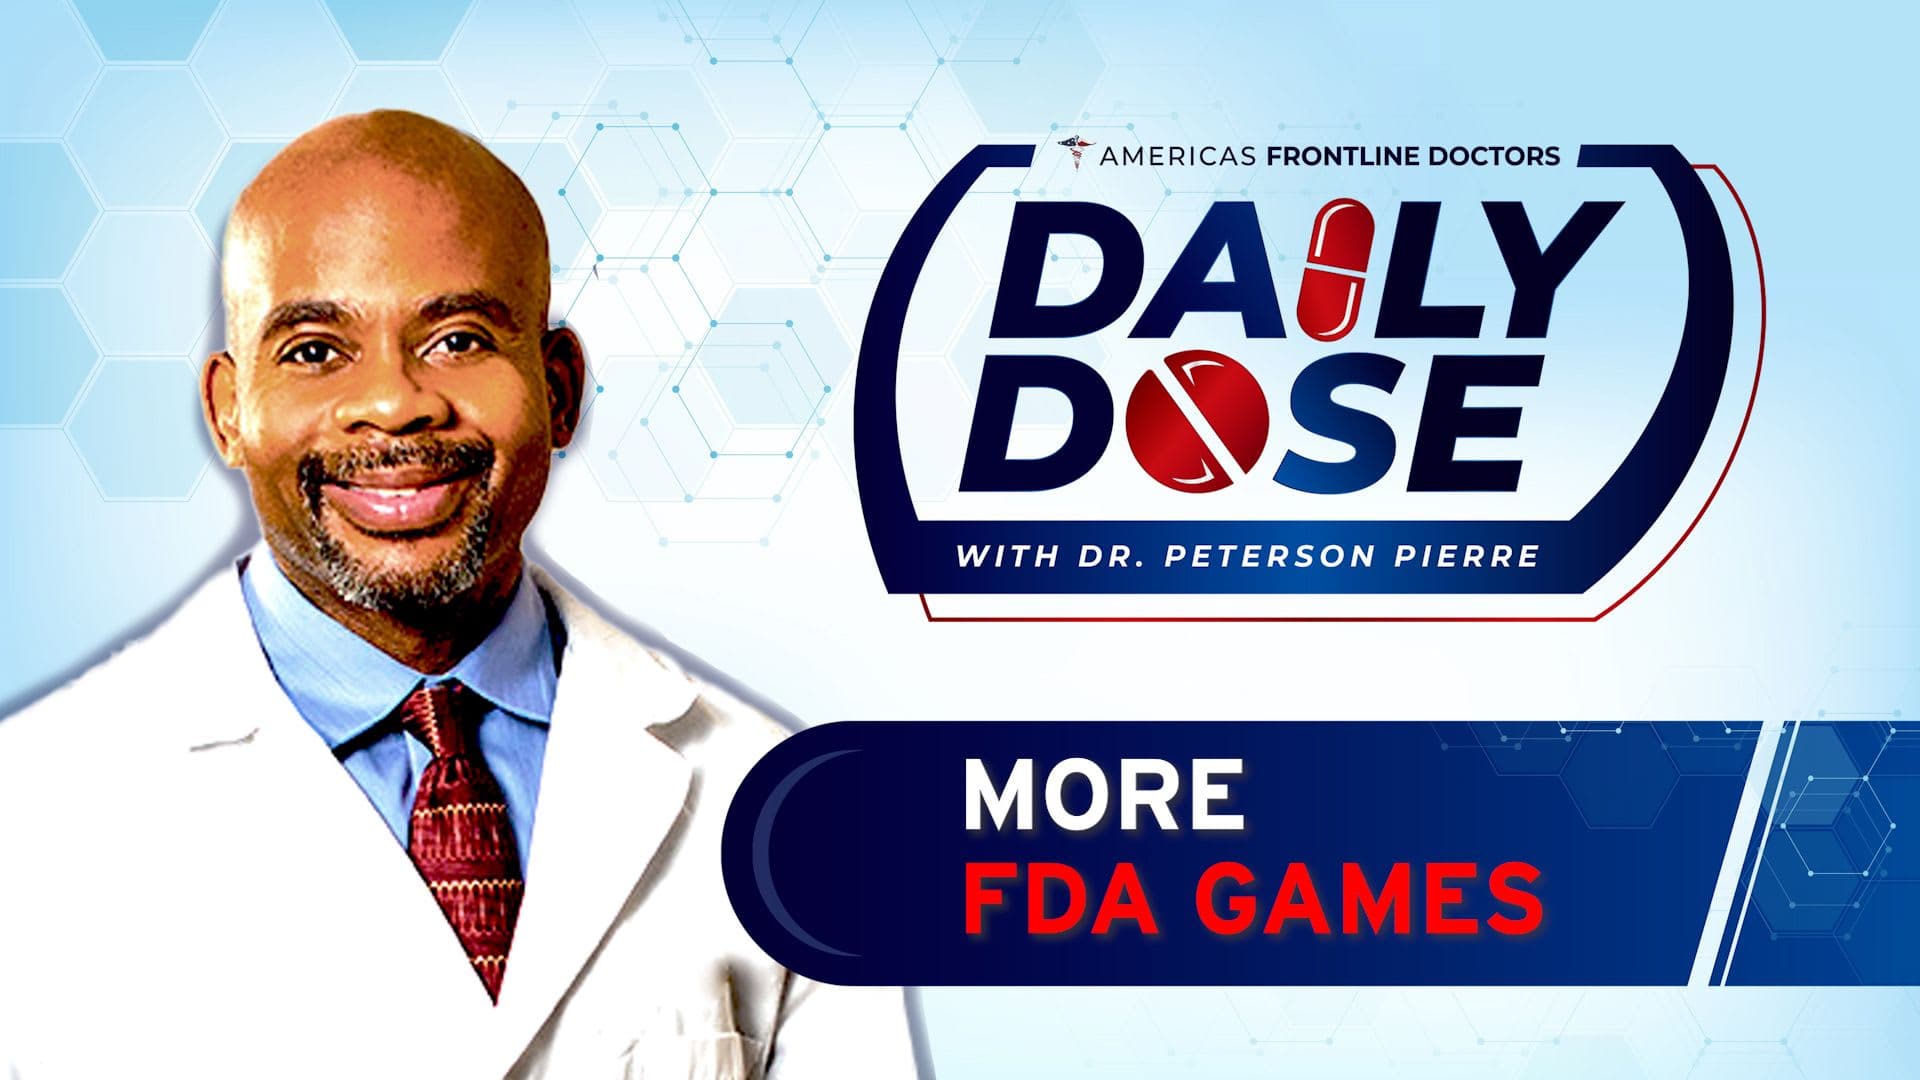 Daily Dose: 'More FDA Games' with Dr. Peterson Pierre